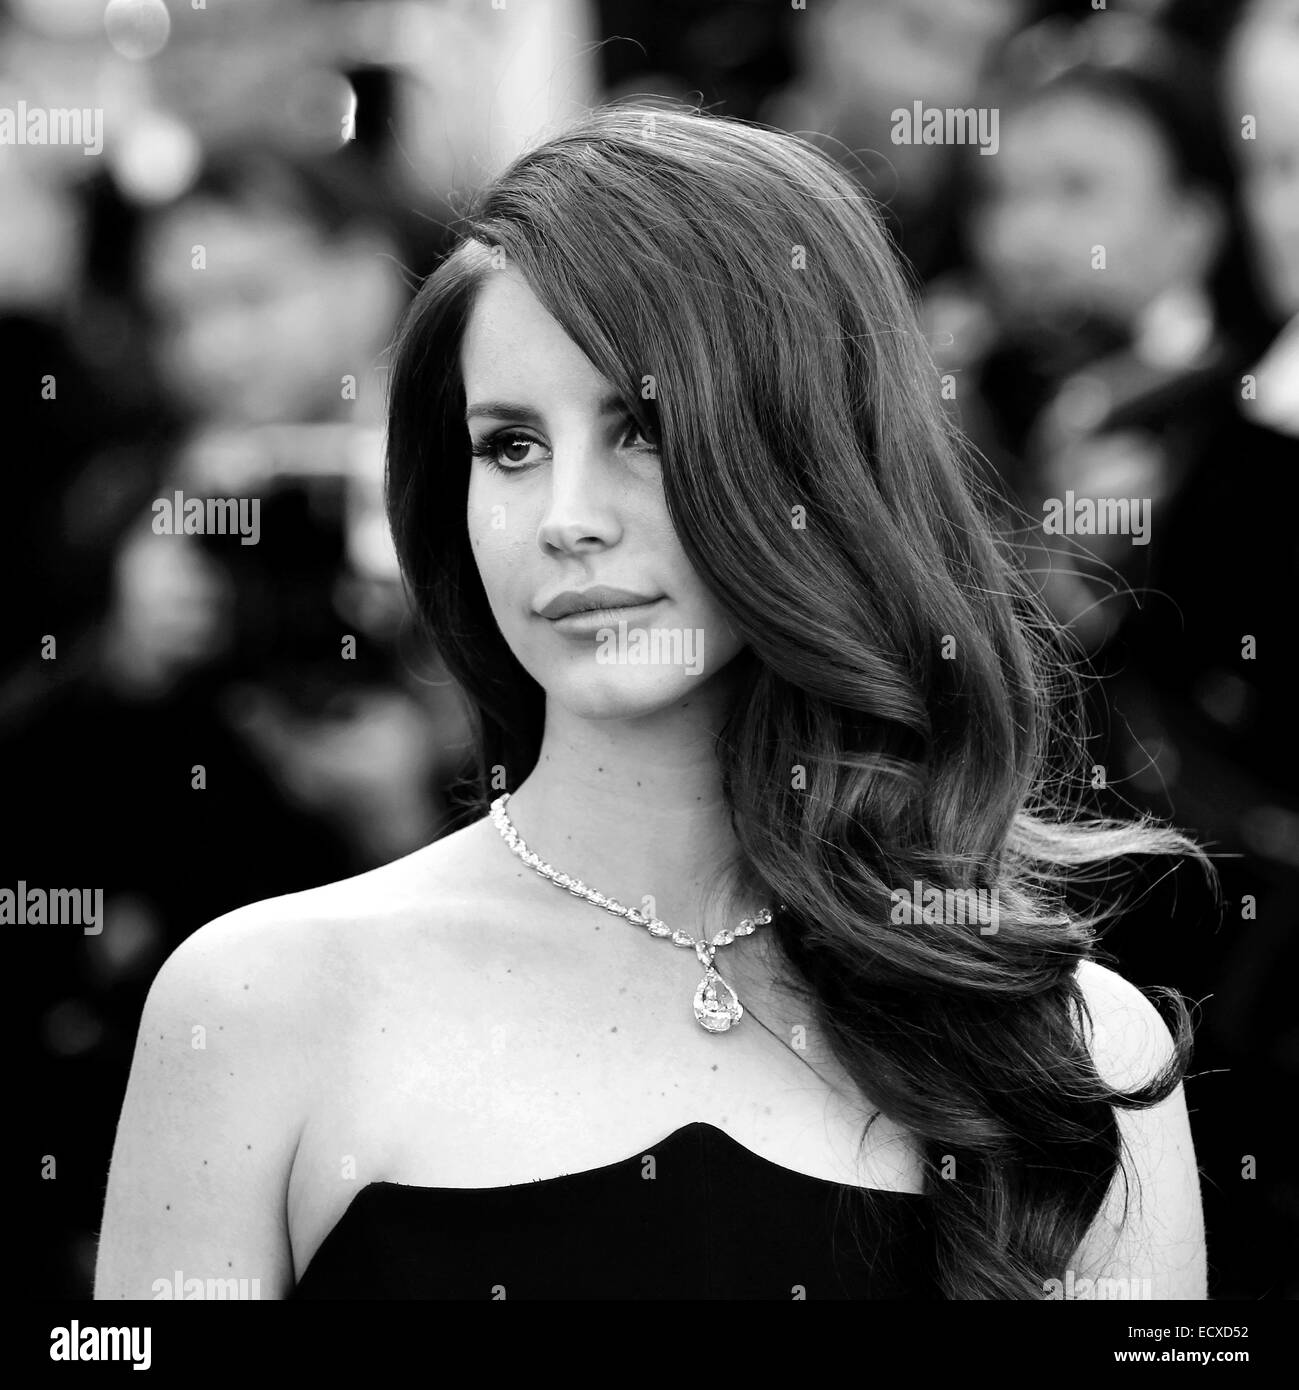 CANNES, FRANCE - MAY 16: Lana Del Rey attends the opening ceremony premiere during the 65th Cannes Film Festival on May 16, 2012 Stock Photo